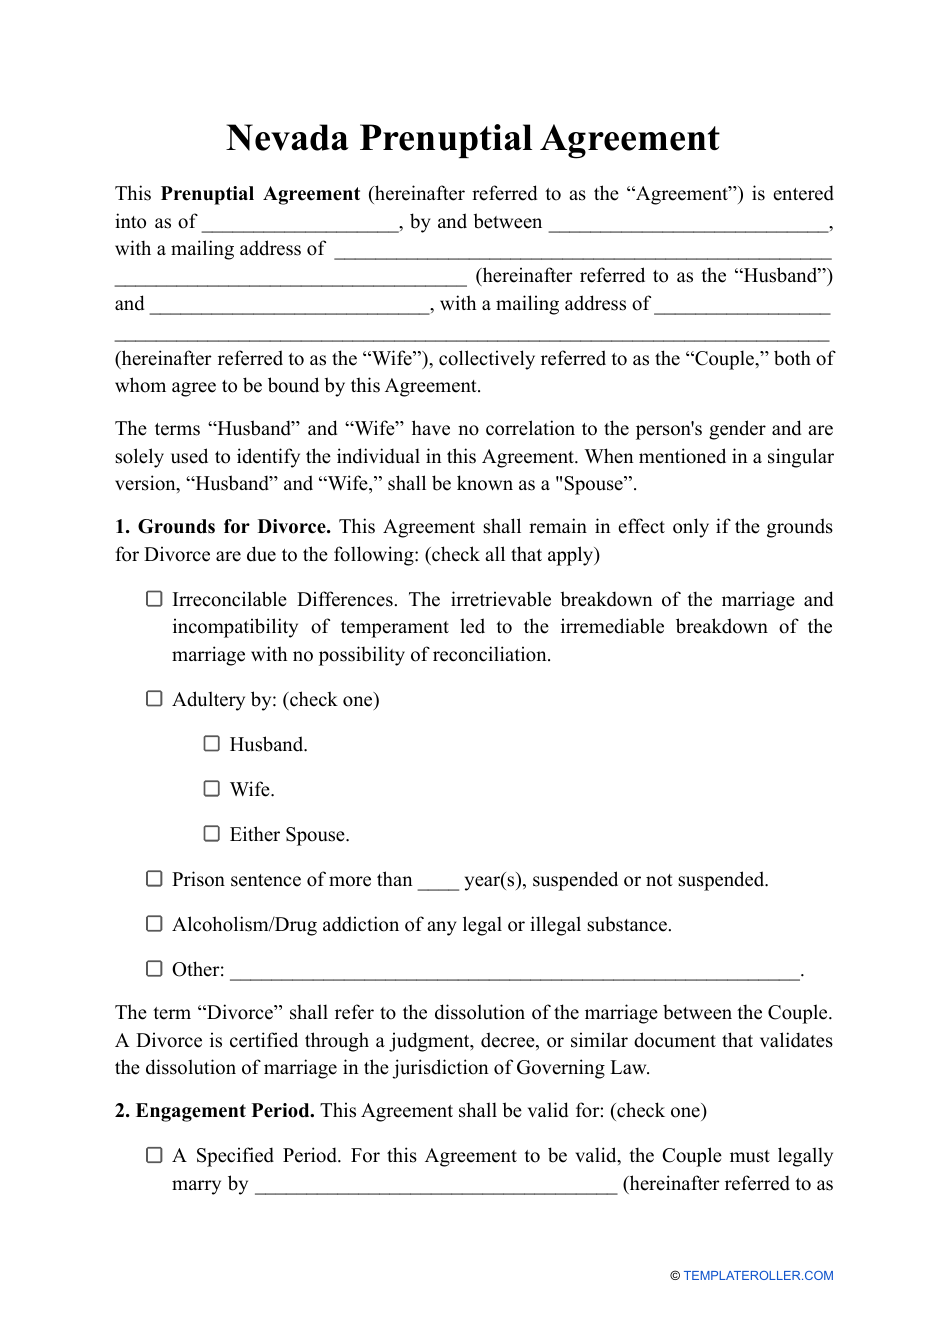 Prenuptial Agreement Template - Nevada, Page 1